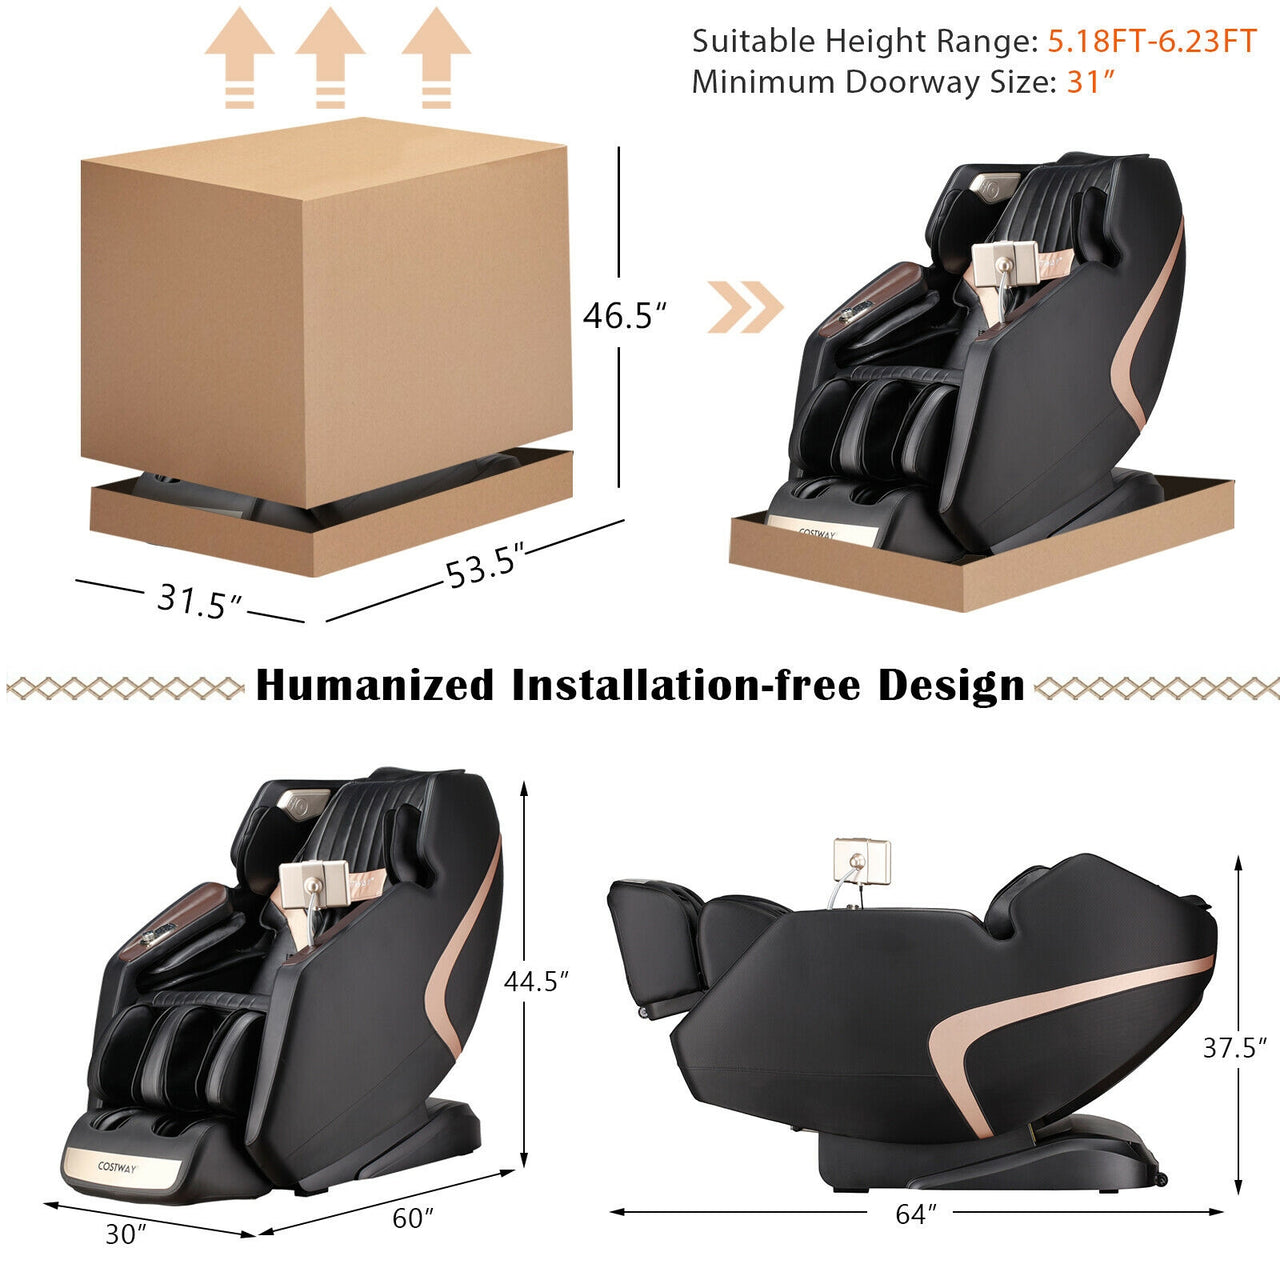 Enjoyment 13 - 3D SL-Track Full Body Zero Gravity Massage Chair with Thai Stretch - Gallery View 4 of 10